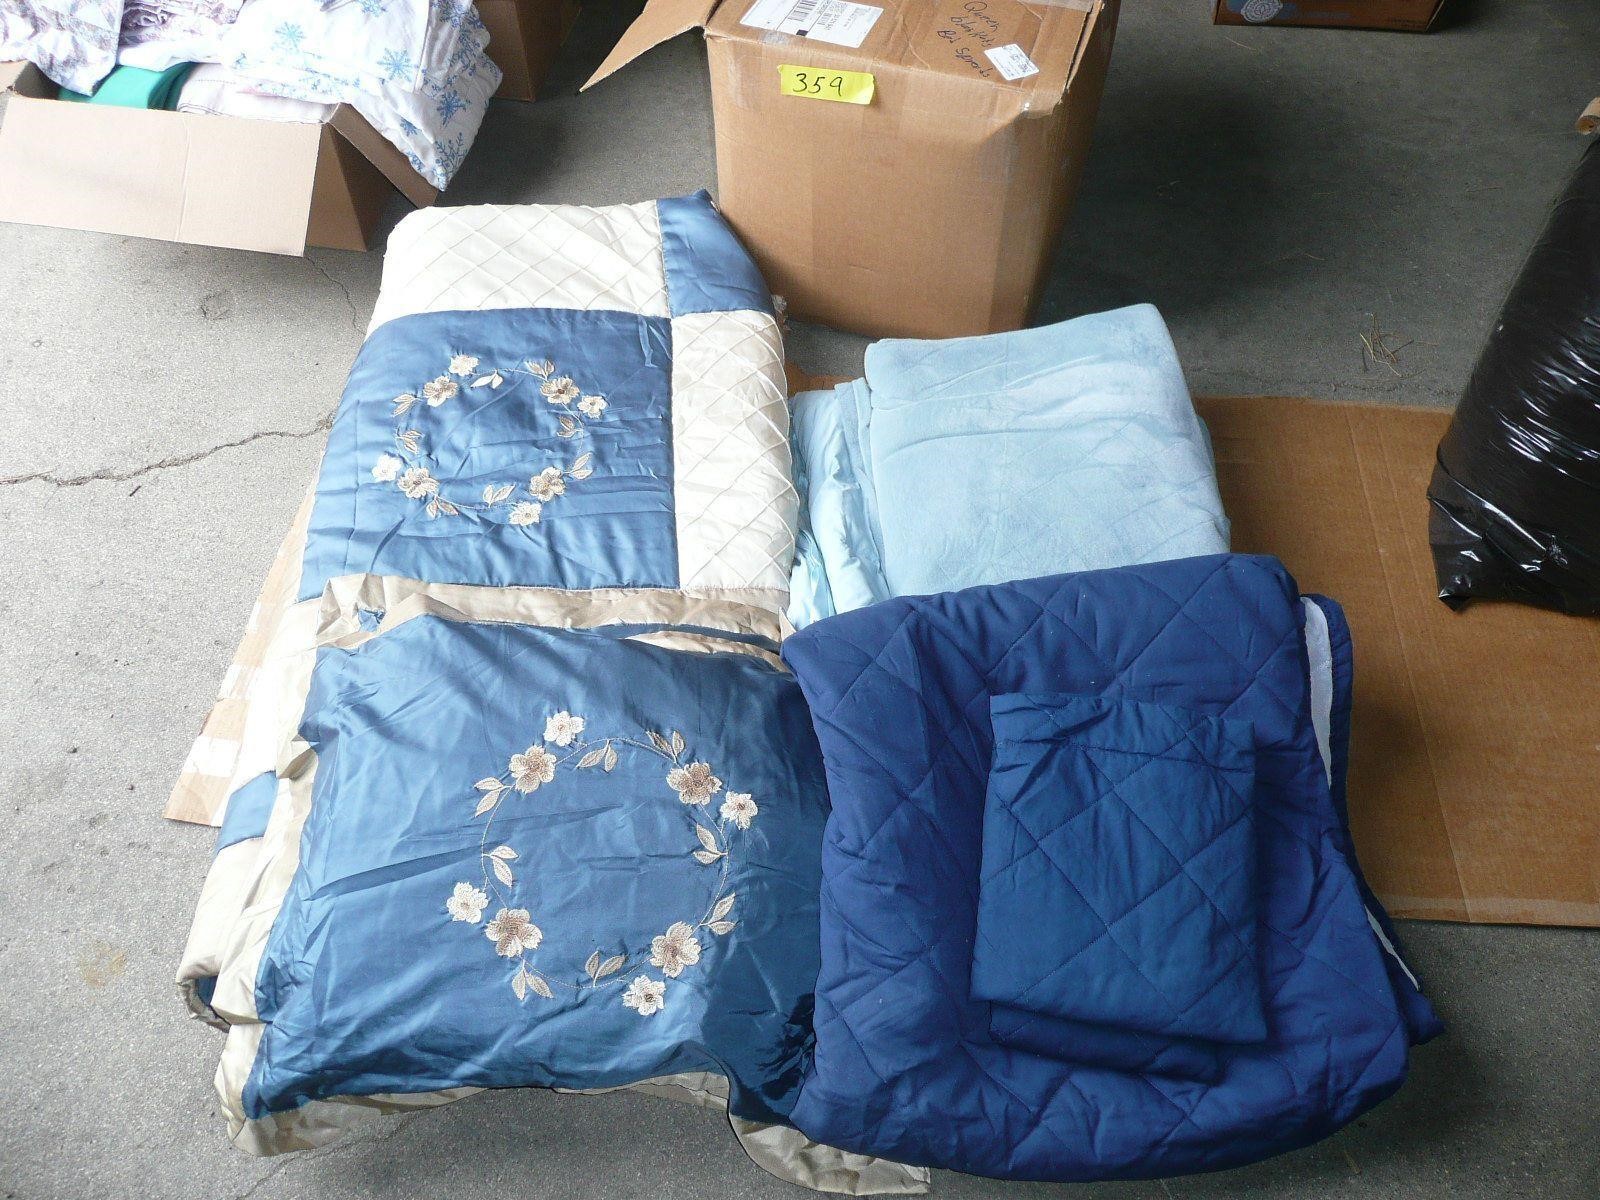 Queen Size Blanket and Pillow plus other blankets